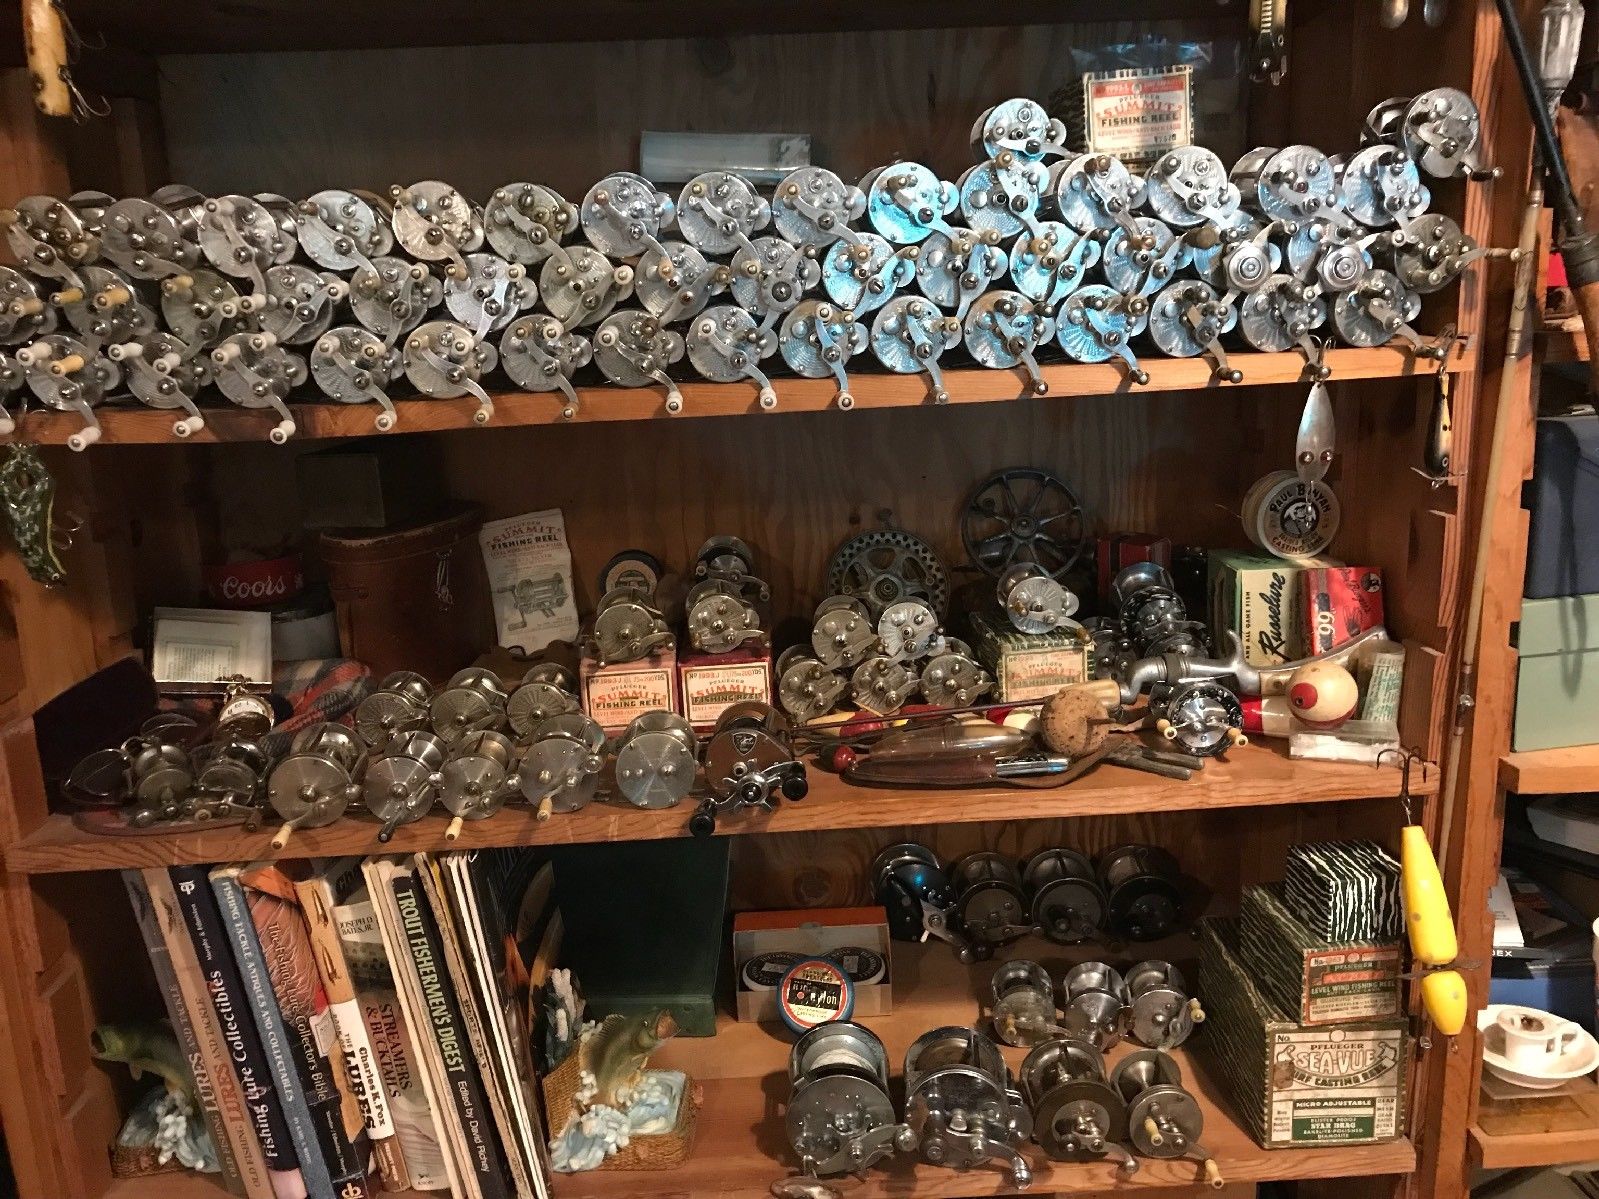 VINTAGE PFLUEGER FISHING REEL COLLECTION - WOW - that's a lot of reels! —  Steemit